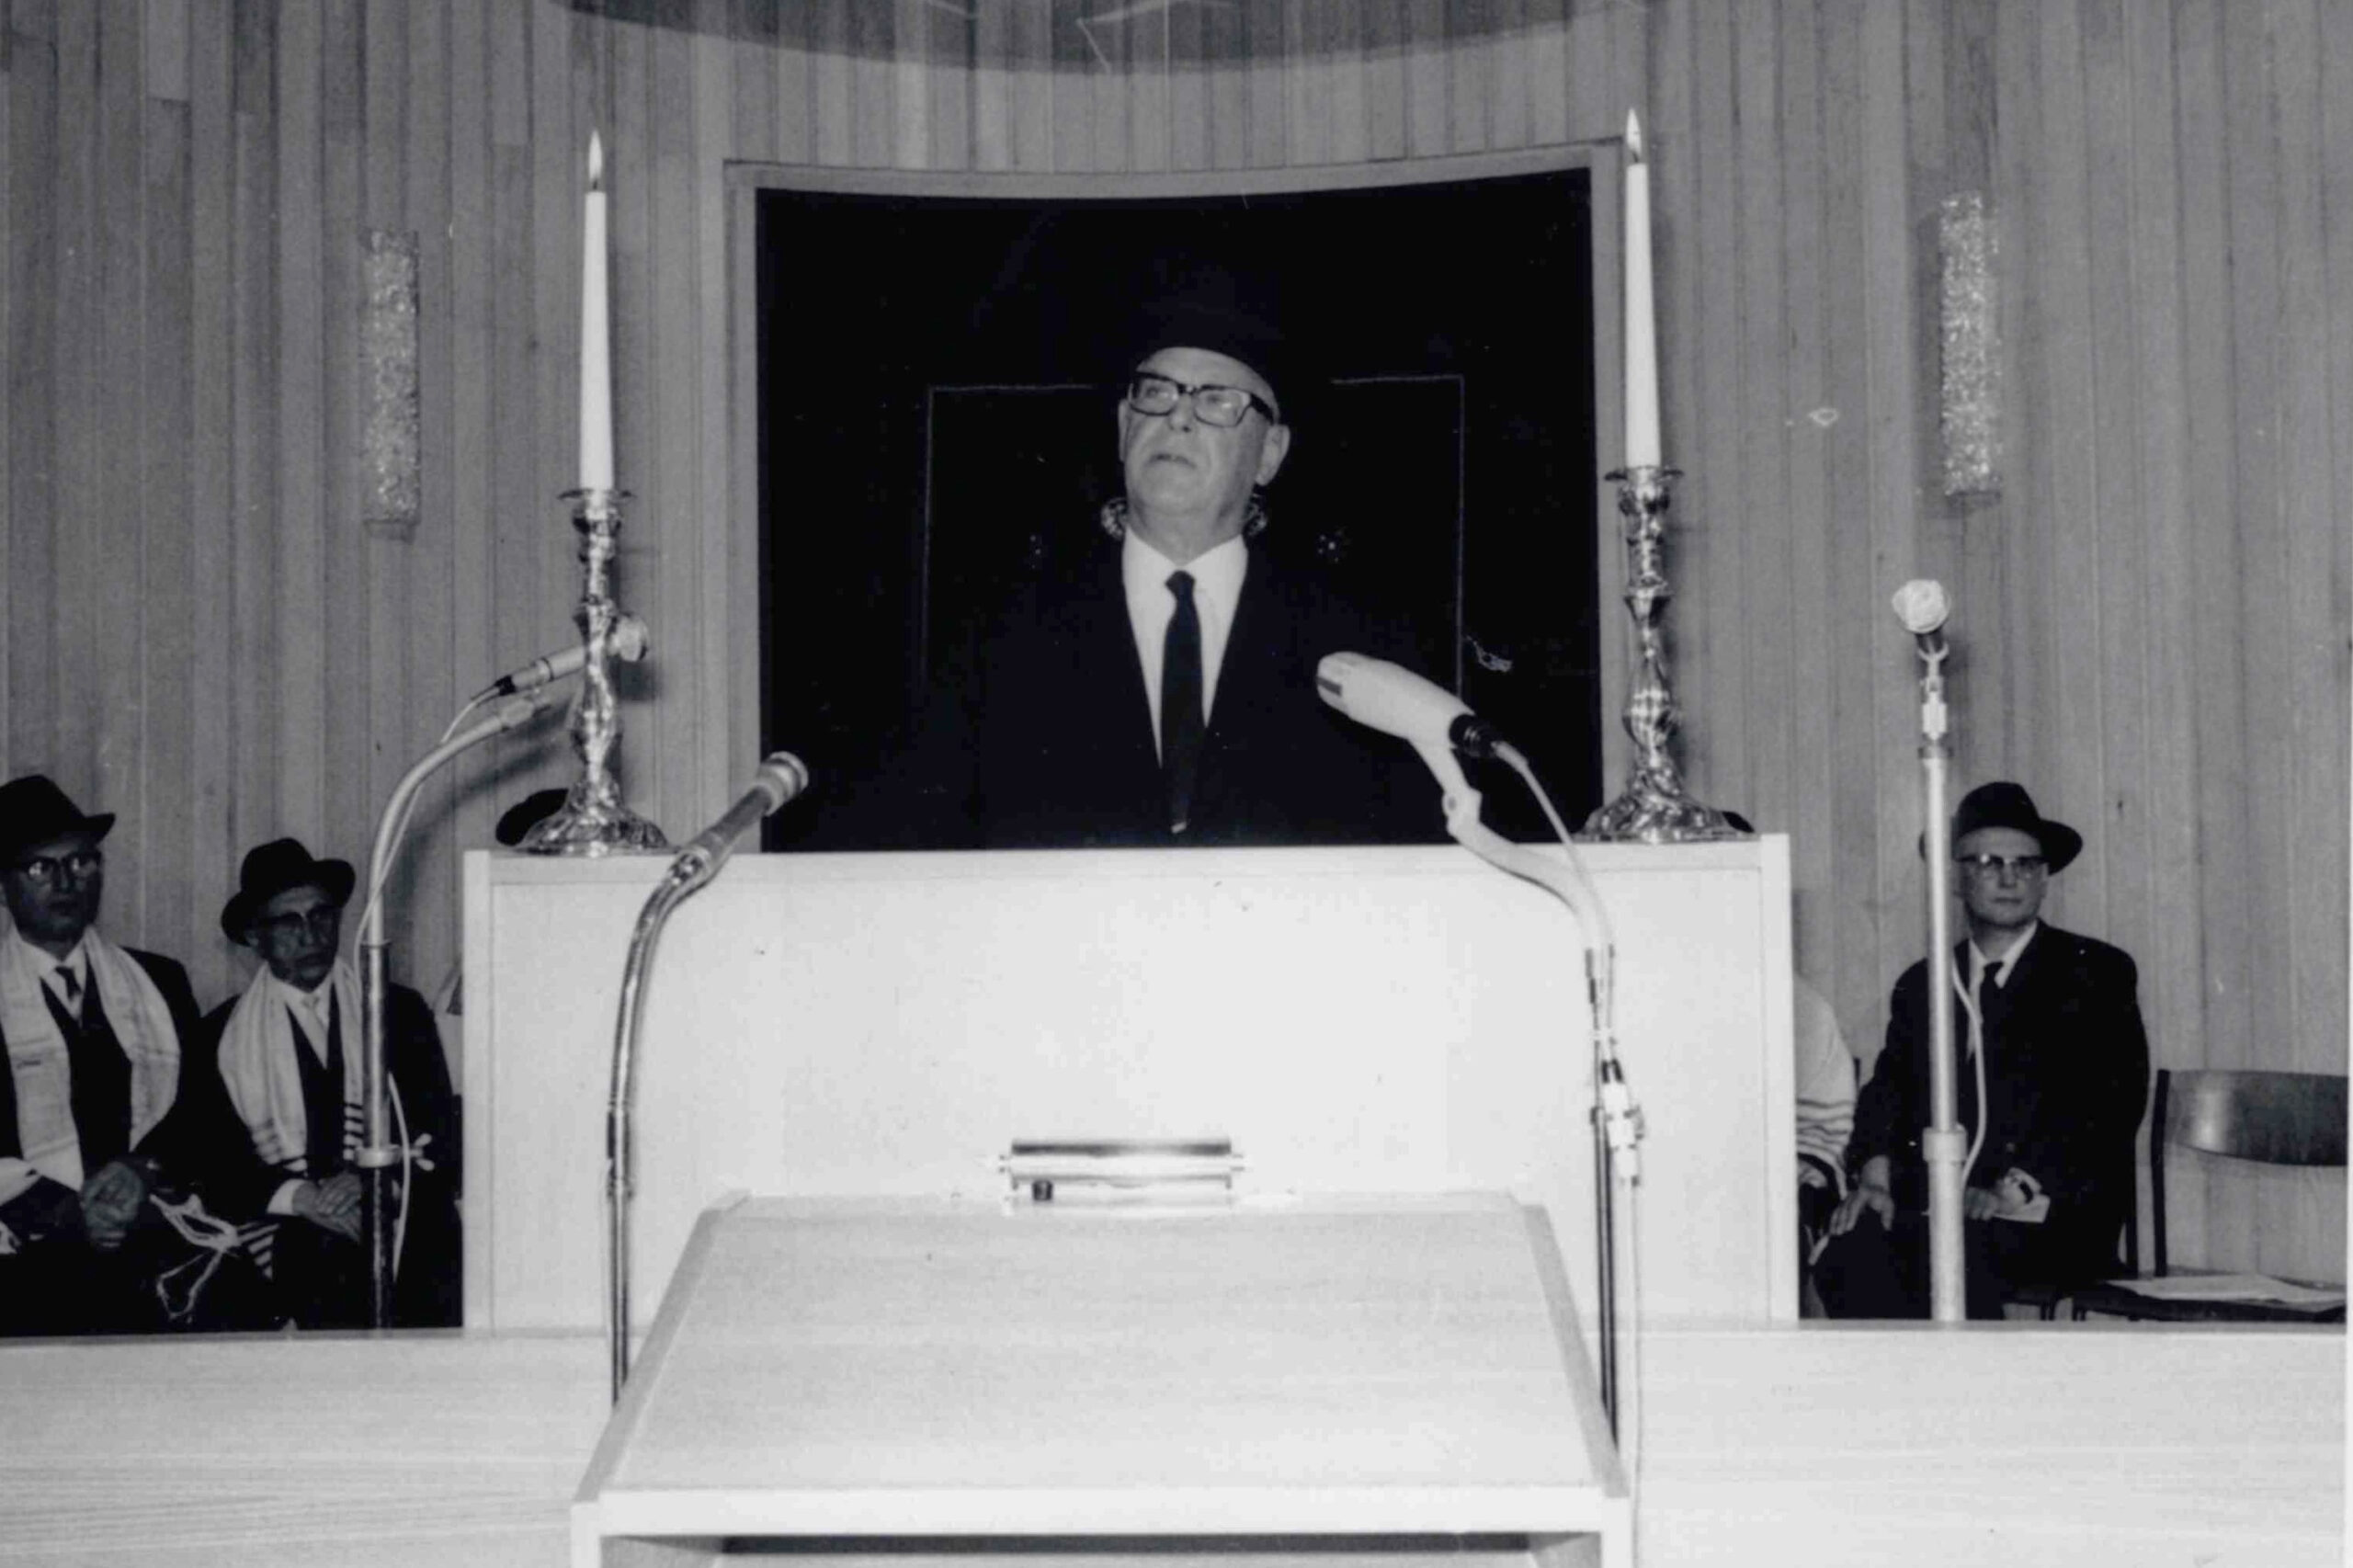 The Prime Minister of Hesse, Dr. Georg August Zinn, during his welcoming speech at the inauguration of the new synagogue building. Photographer: Adolf Diamant. Collection Adolf Diamant